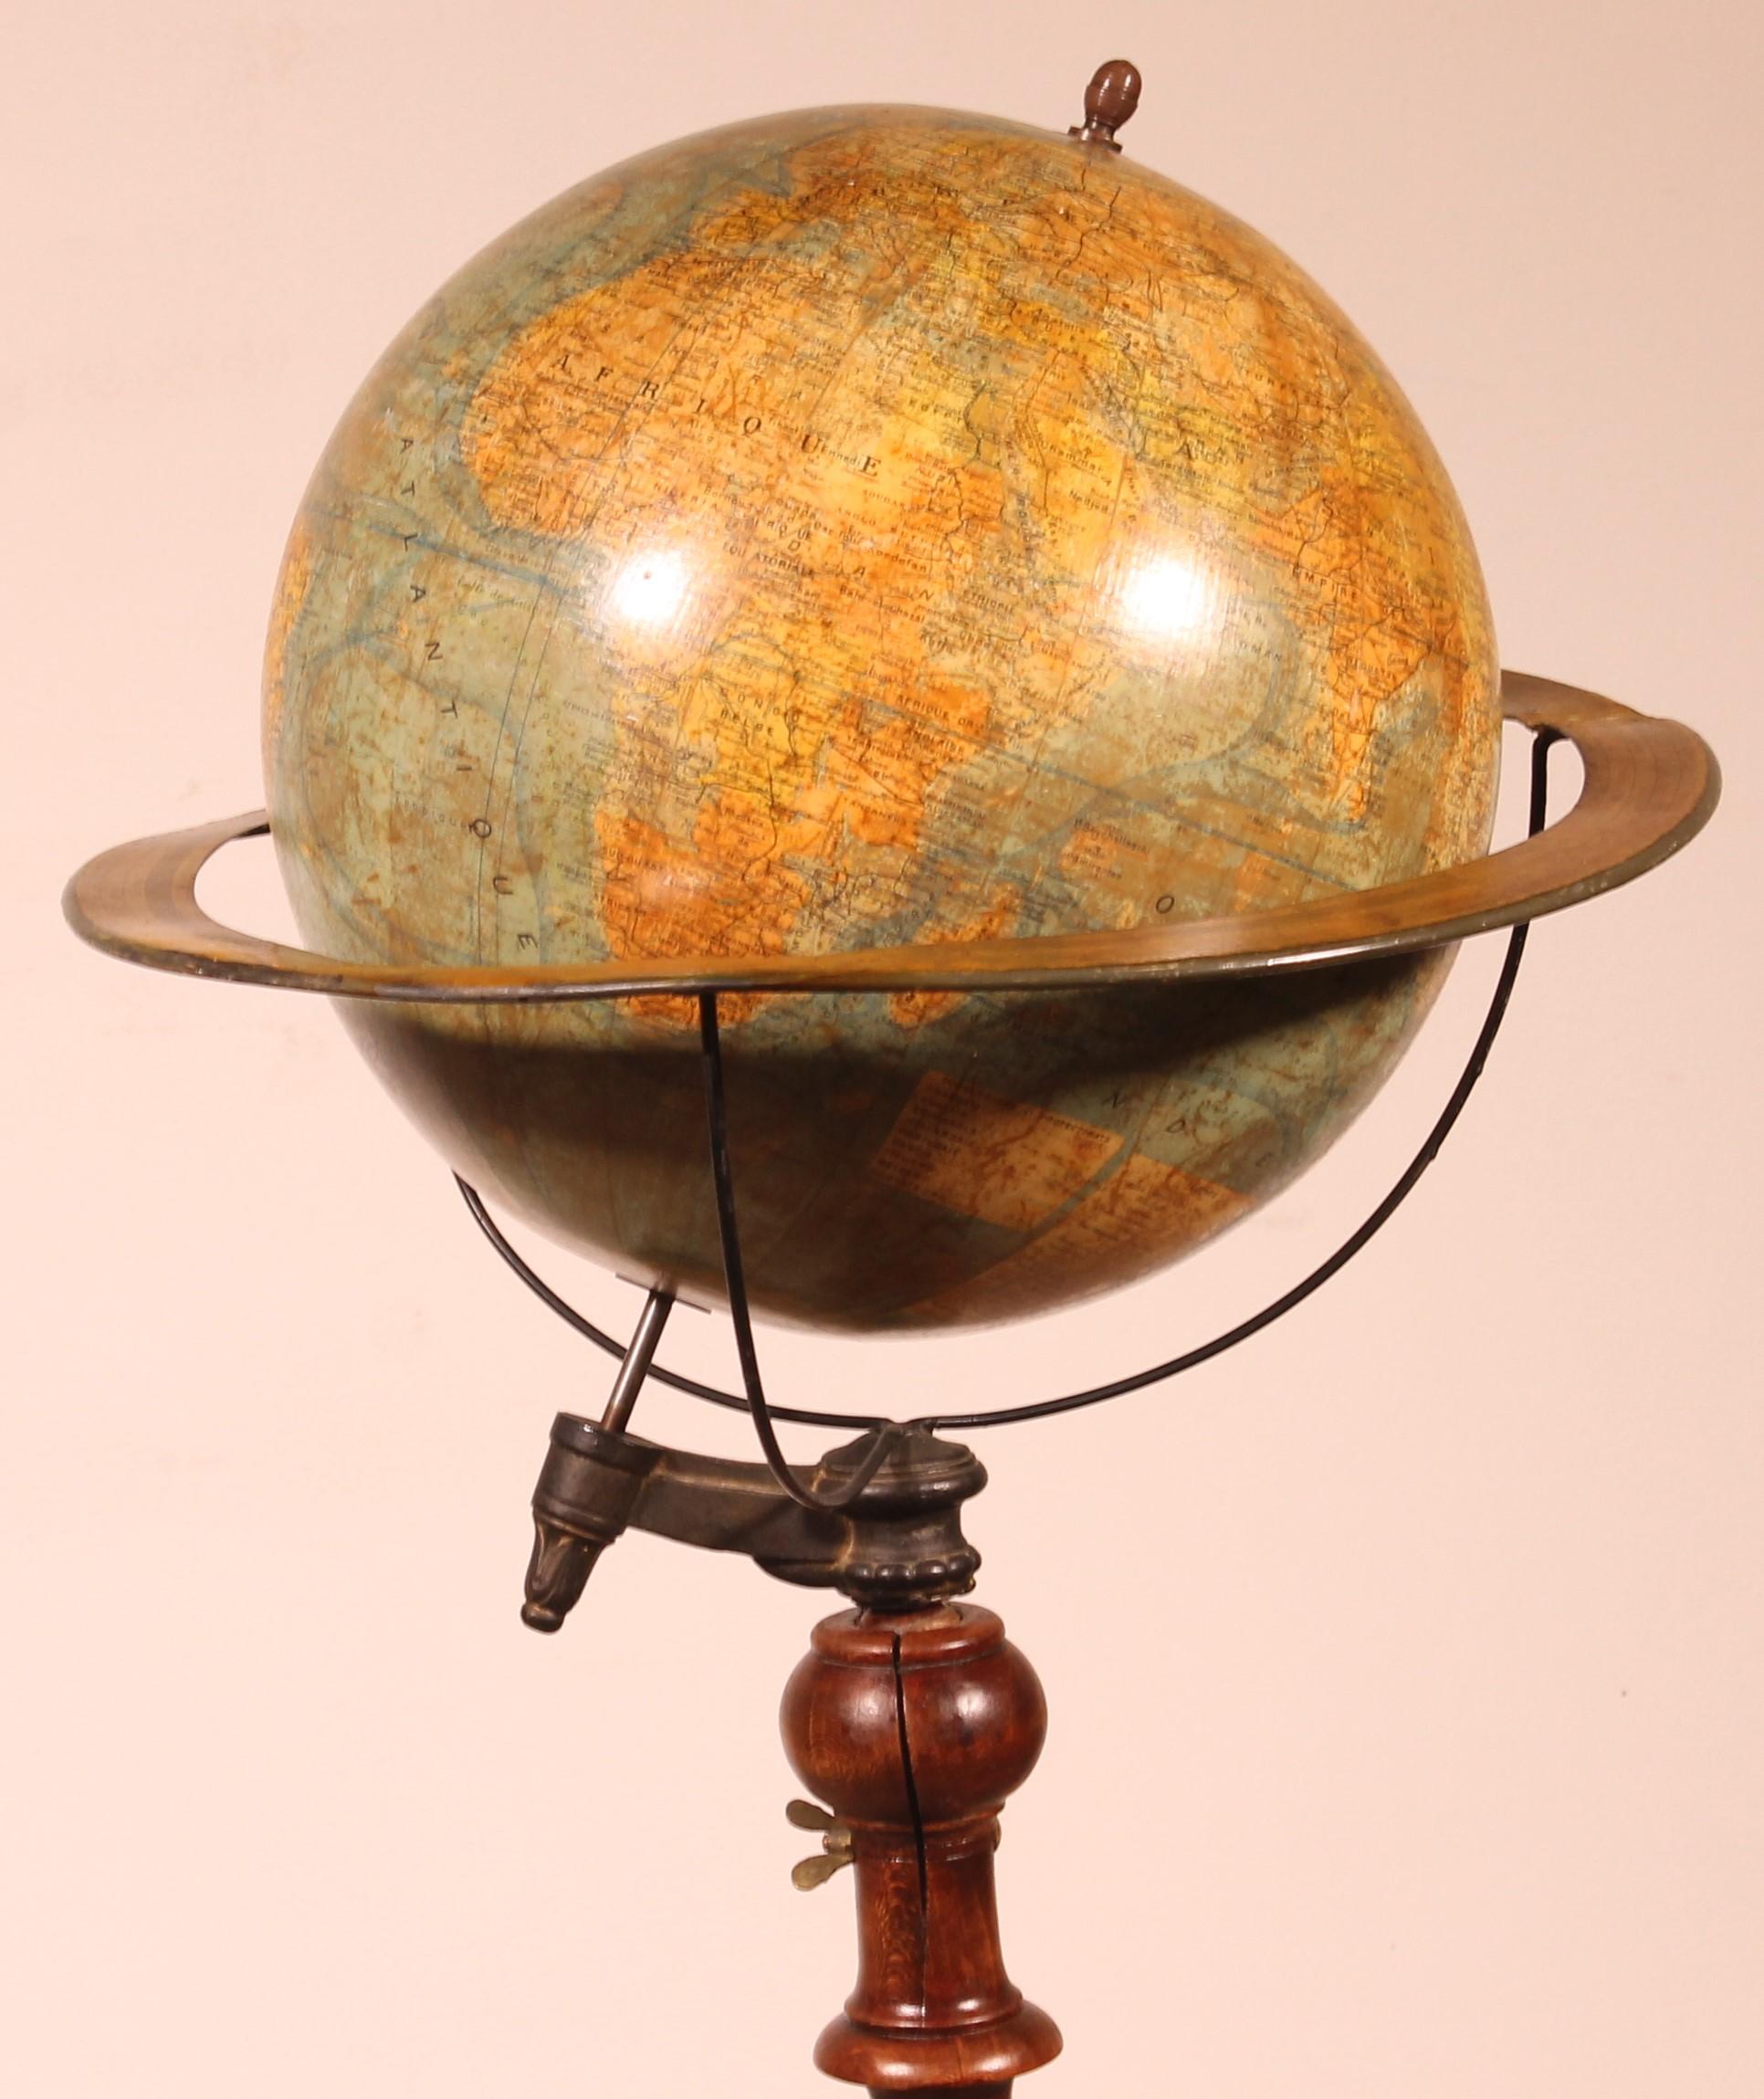 XIXe siècle The Library Terrestrial Globe on Stand From J. Forest Paris From The 19th Century en vente